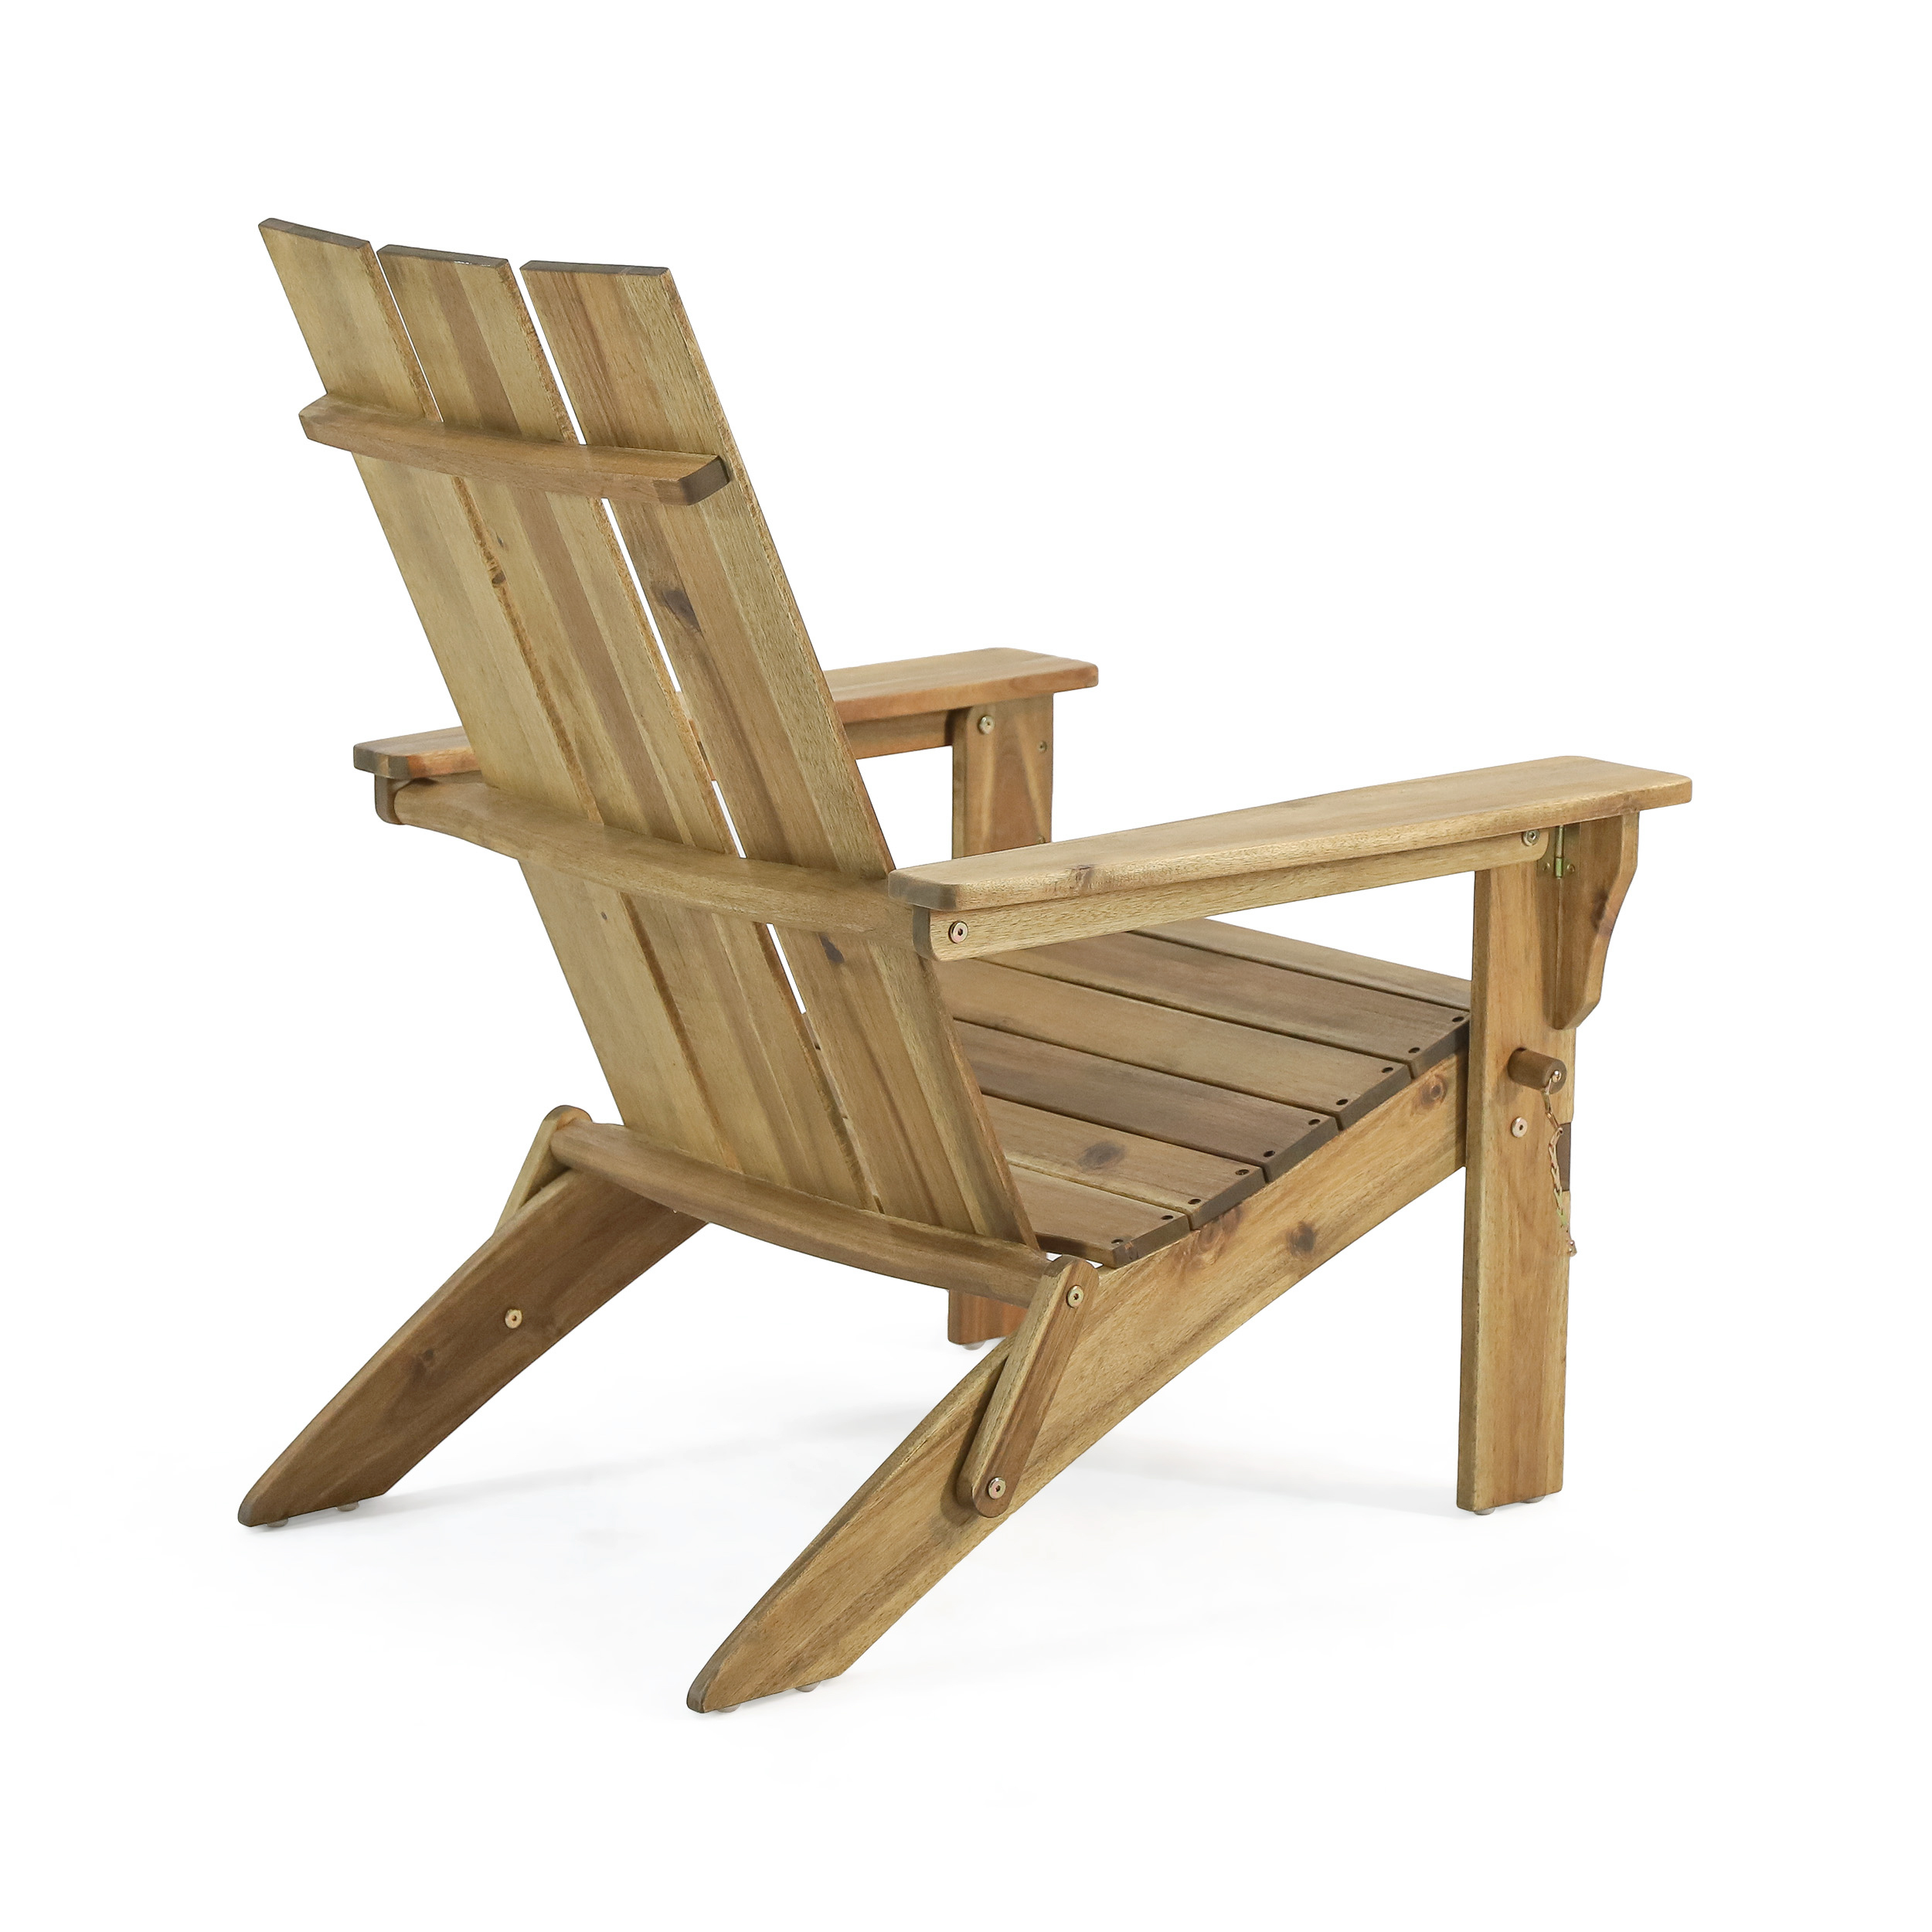 Outdoor Classic Natural Color Solid Wood Adirondack Chair Garden Lounge Chair - image 3 of 5